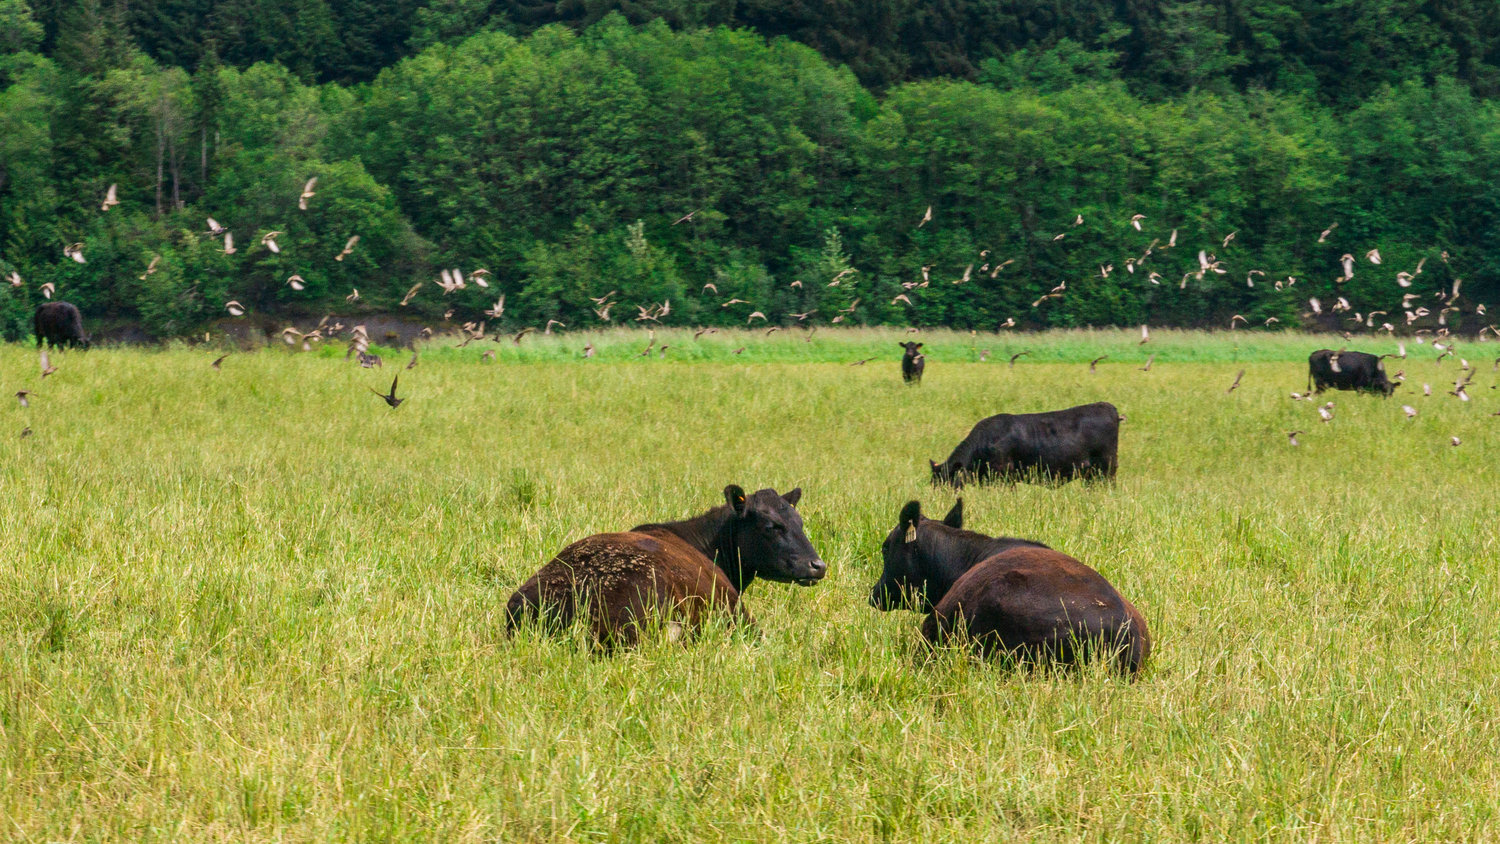 Cows graze in a field surrounded by birds along the Satsop River.